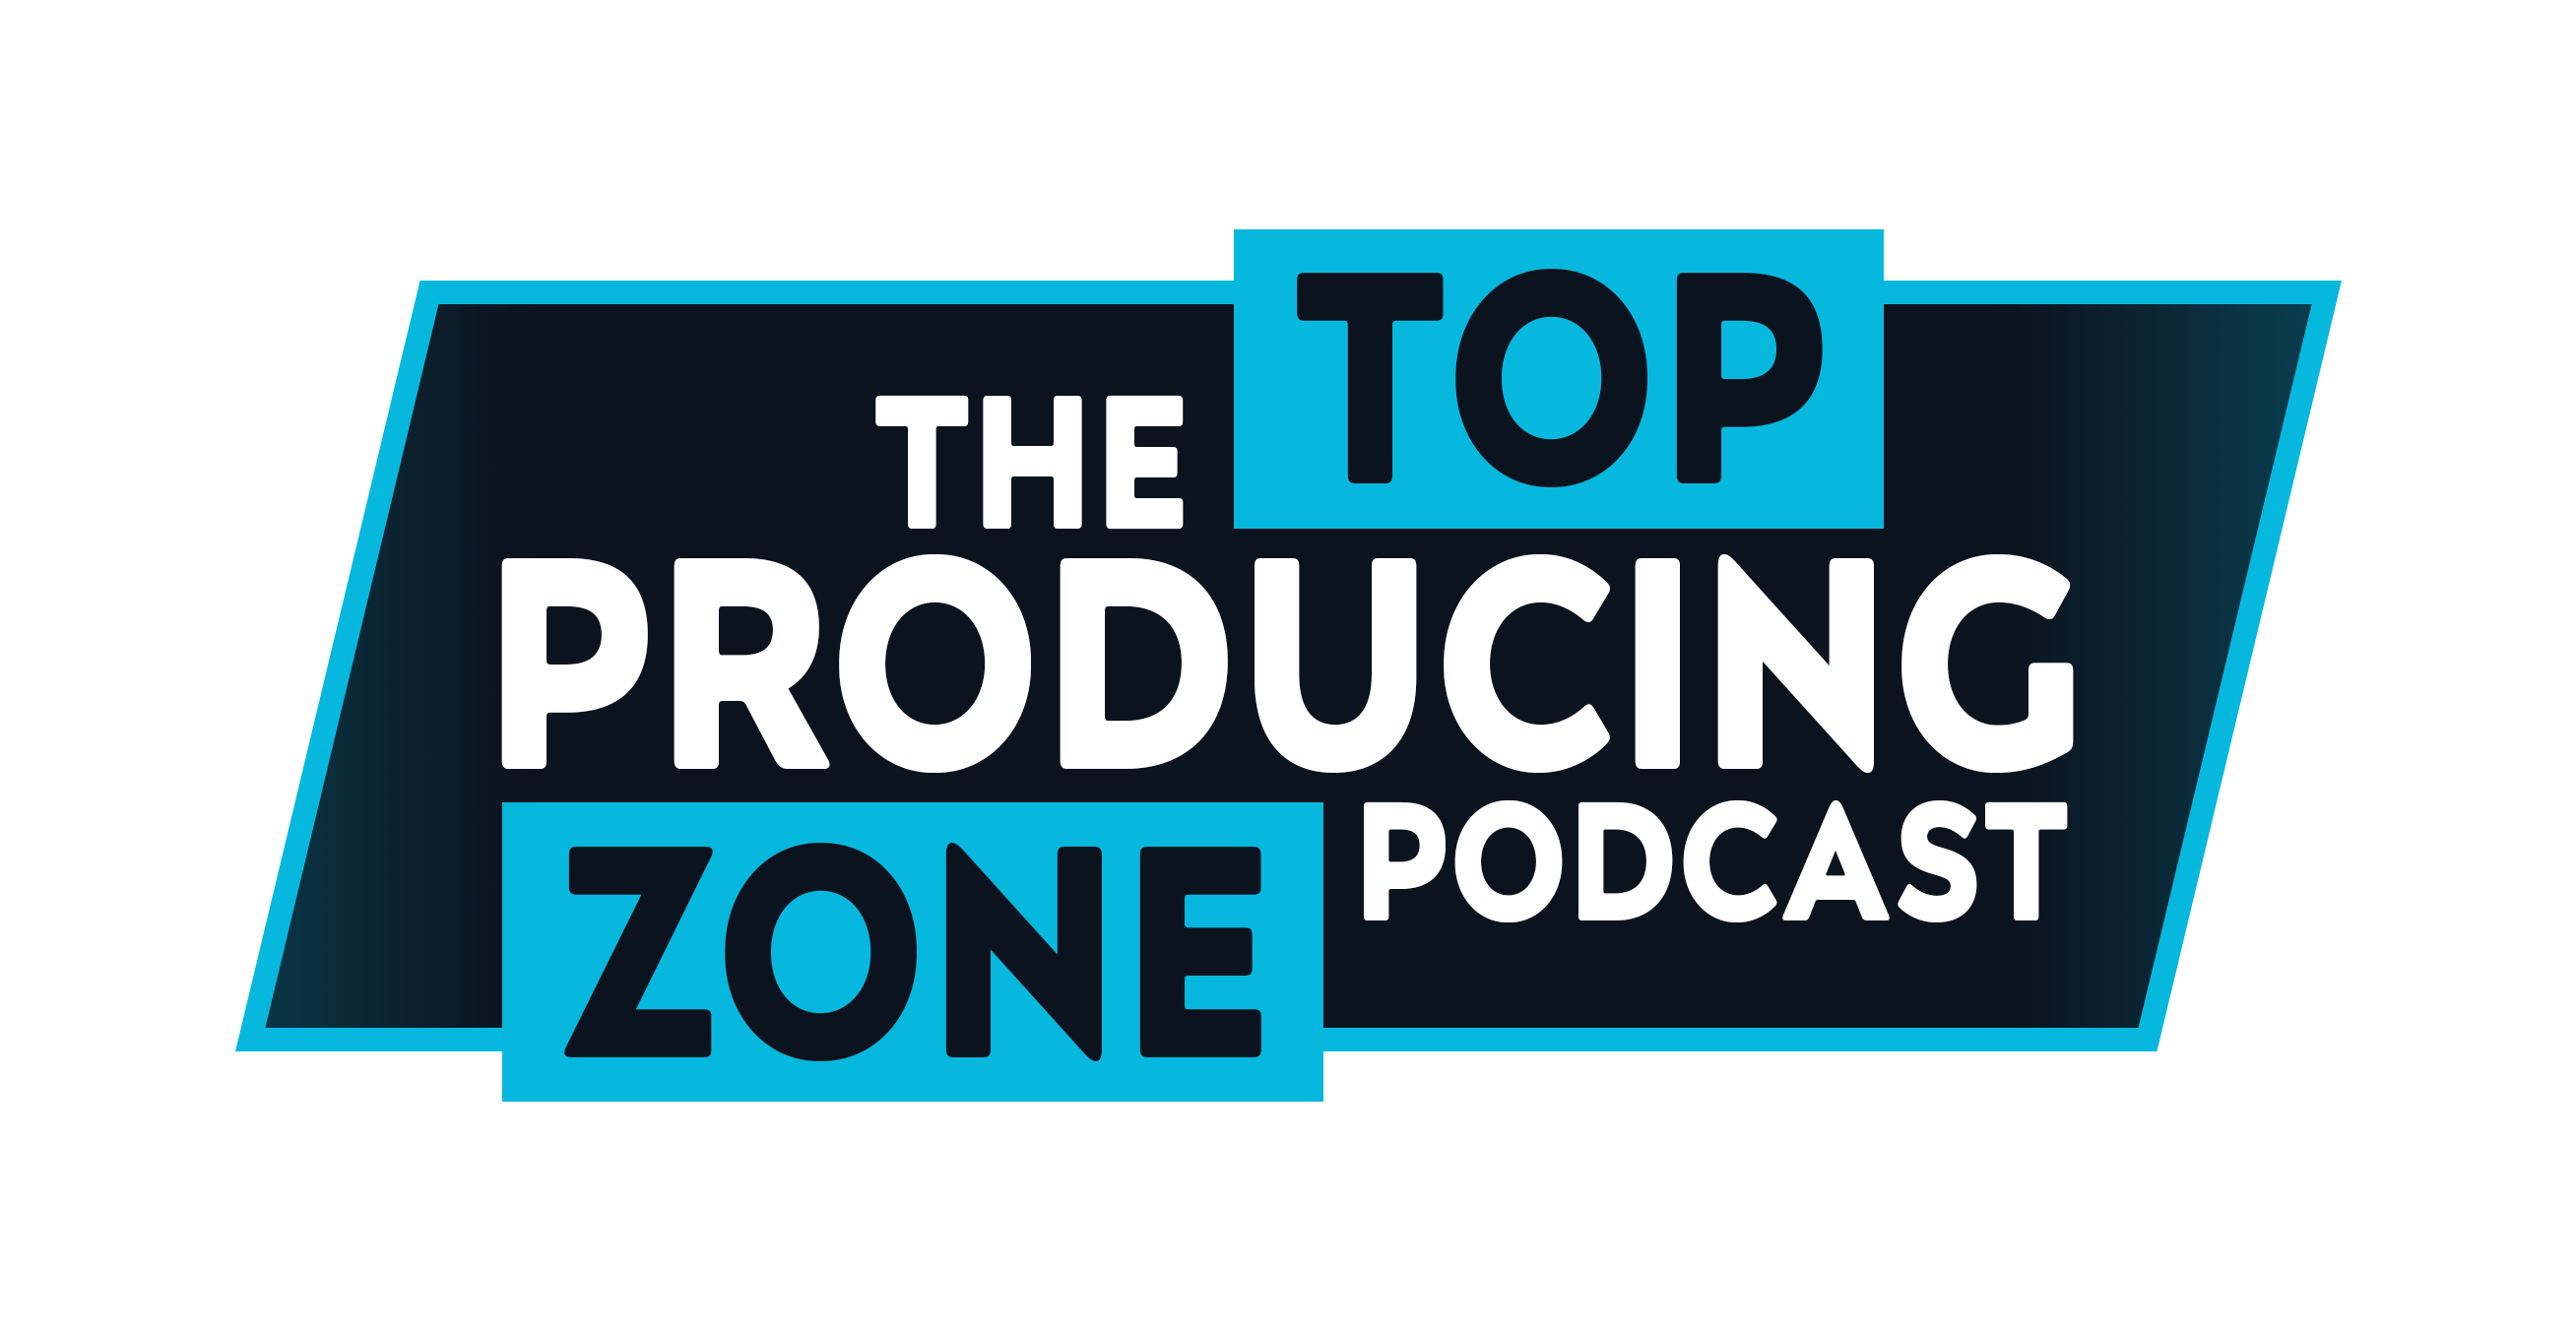 The Top Producing Zone